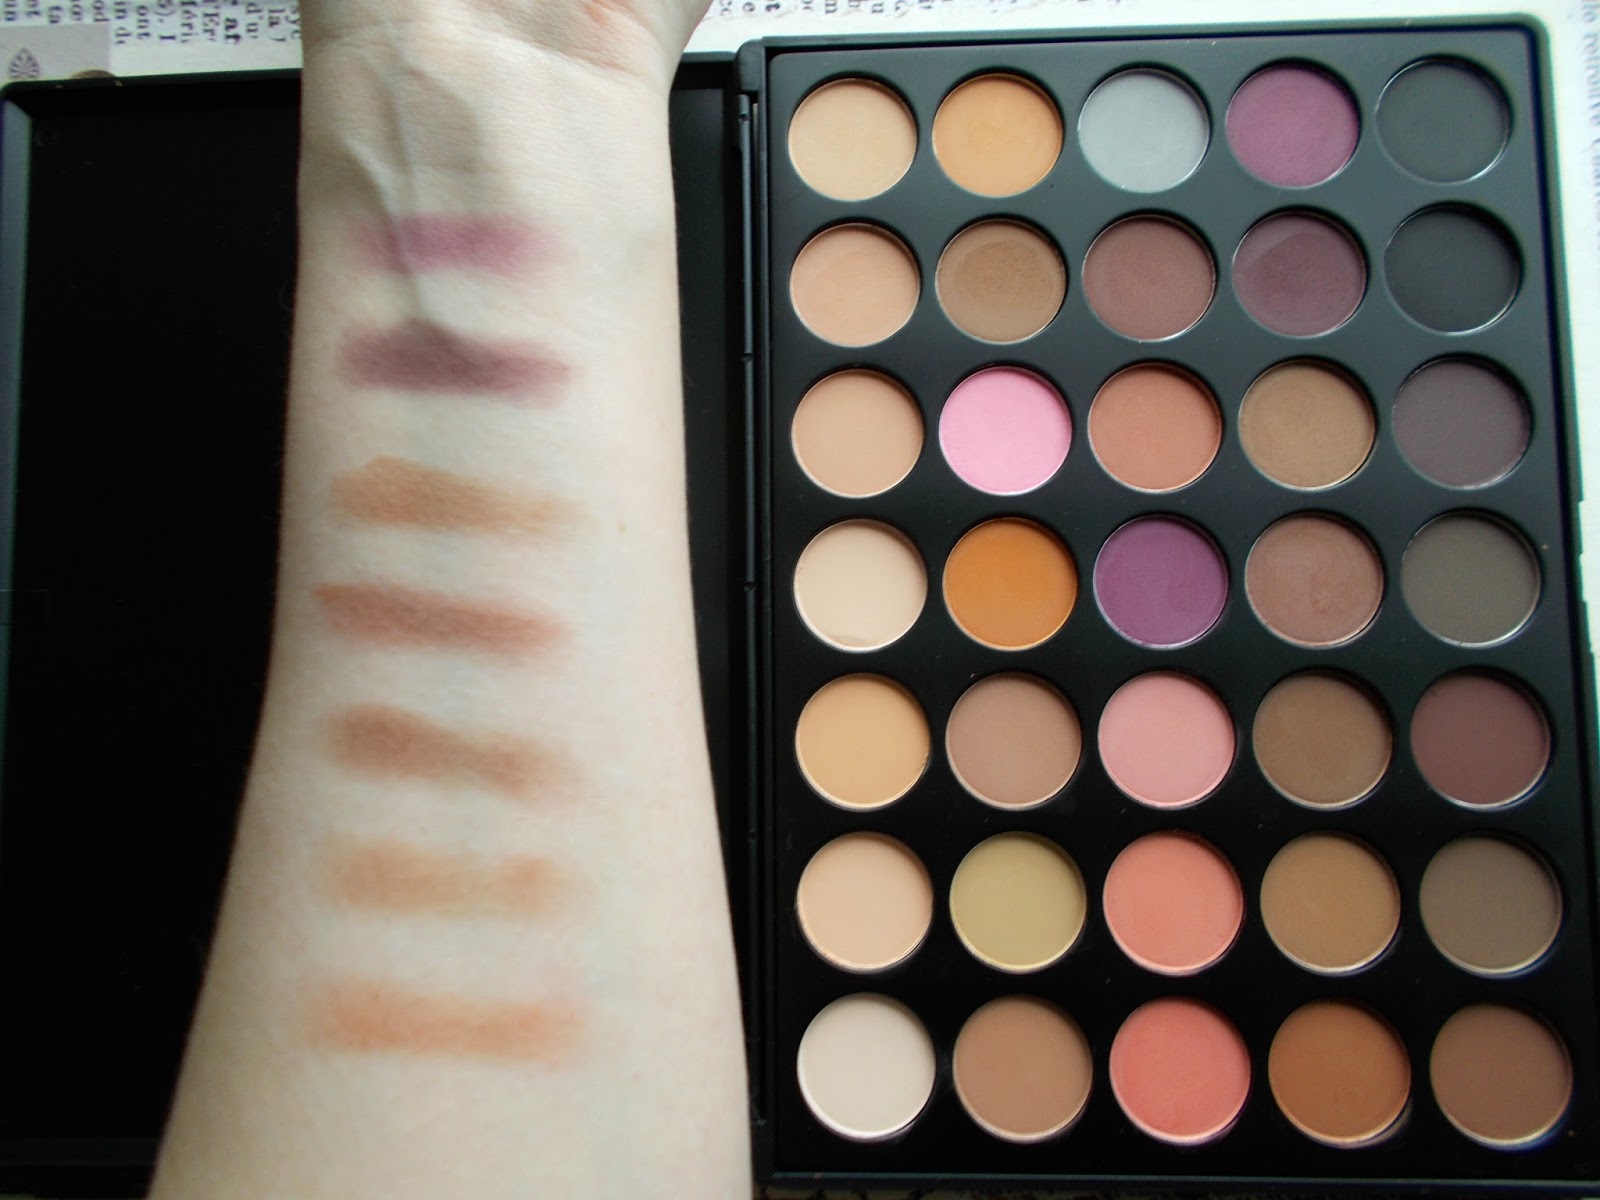 Morphe Brushes BeautyBay review 35N colour matte palette 4th row swatches